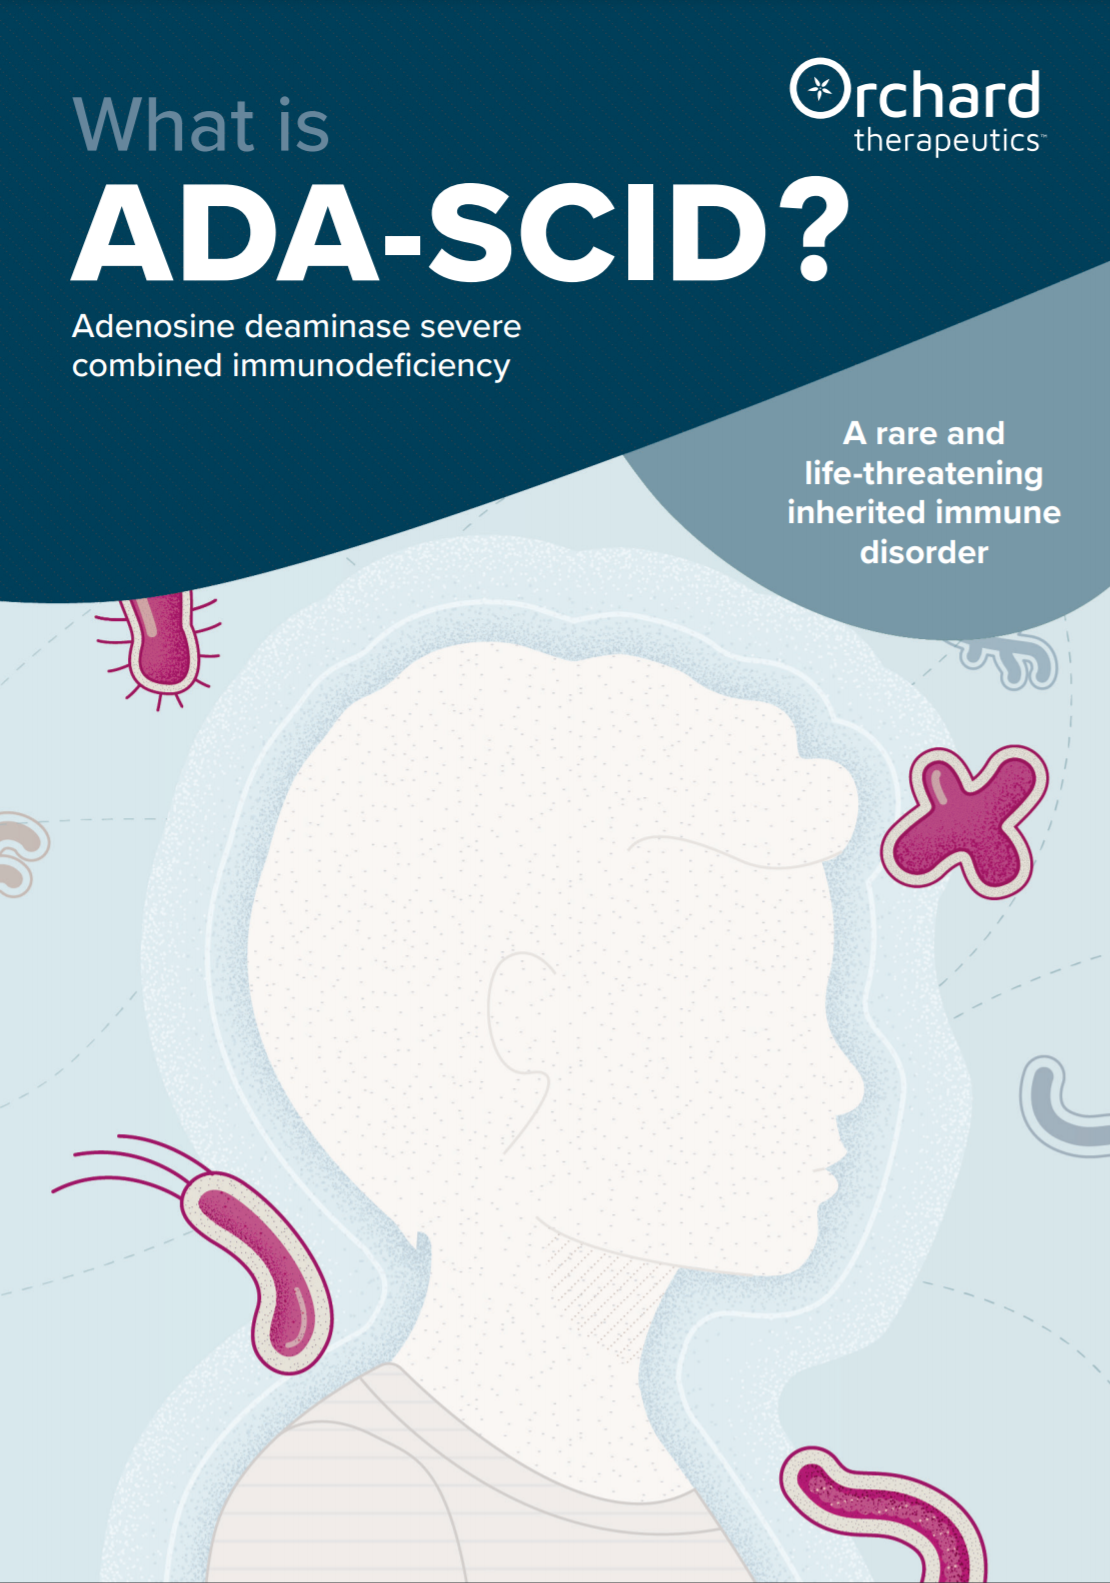 what people does scid affect more